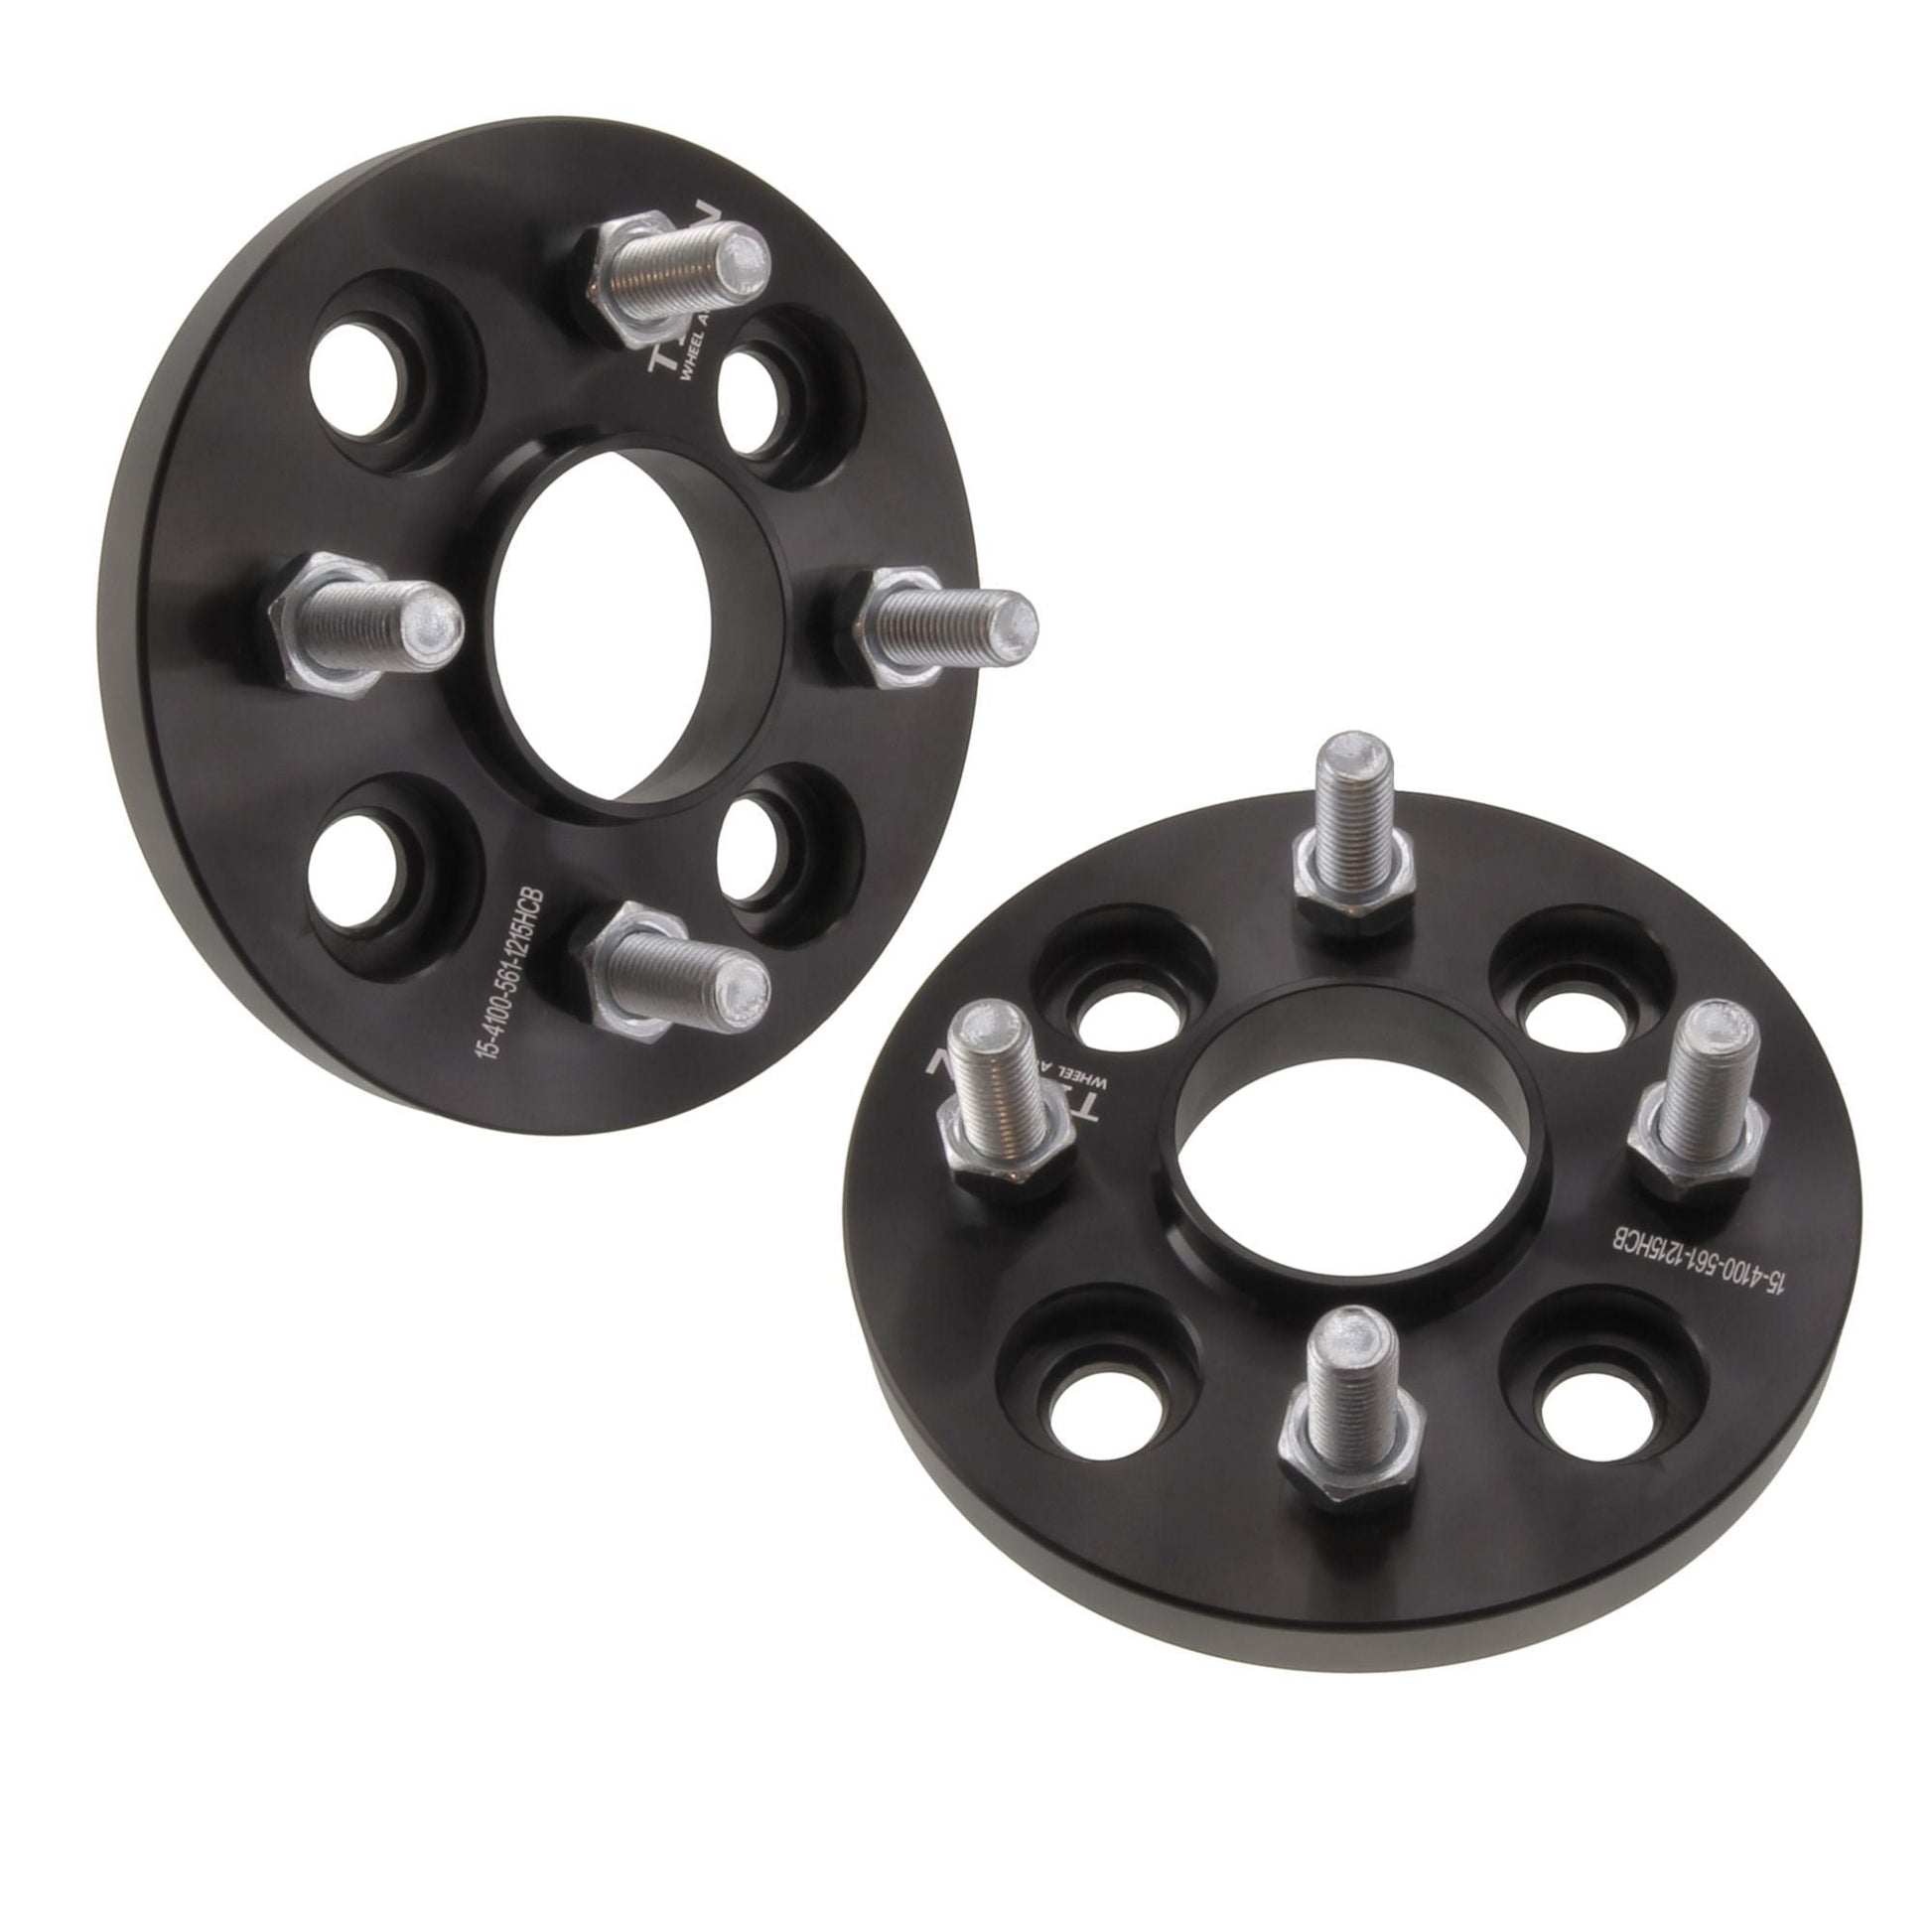 2pc 15mm Thick Wheel Spacers, 5x120 Hubcentric 60.1 Hub